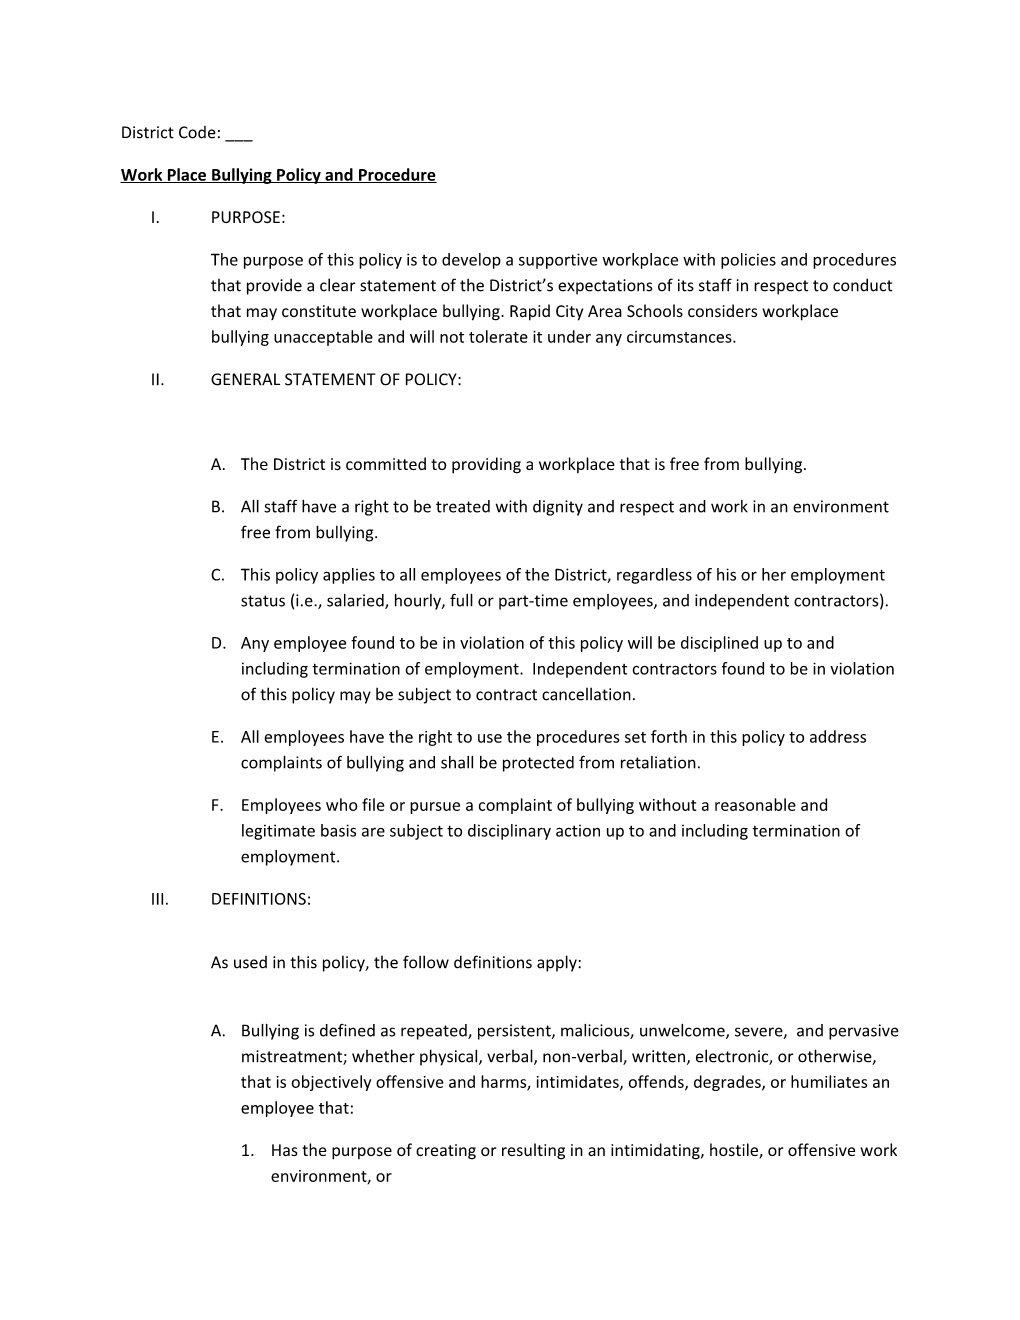 Work Place Bullying Policy and Procedure